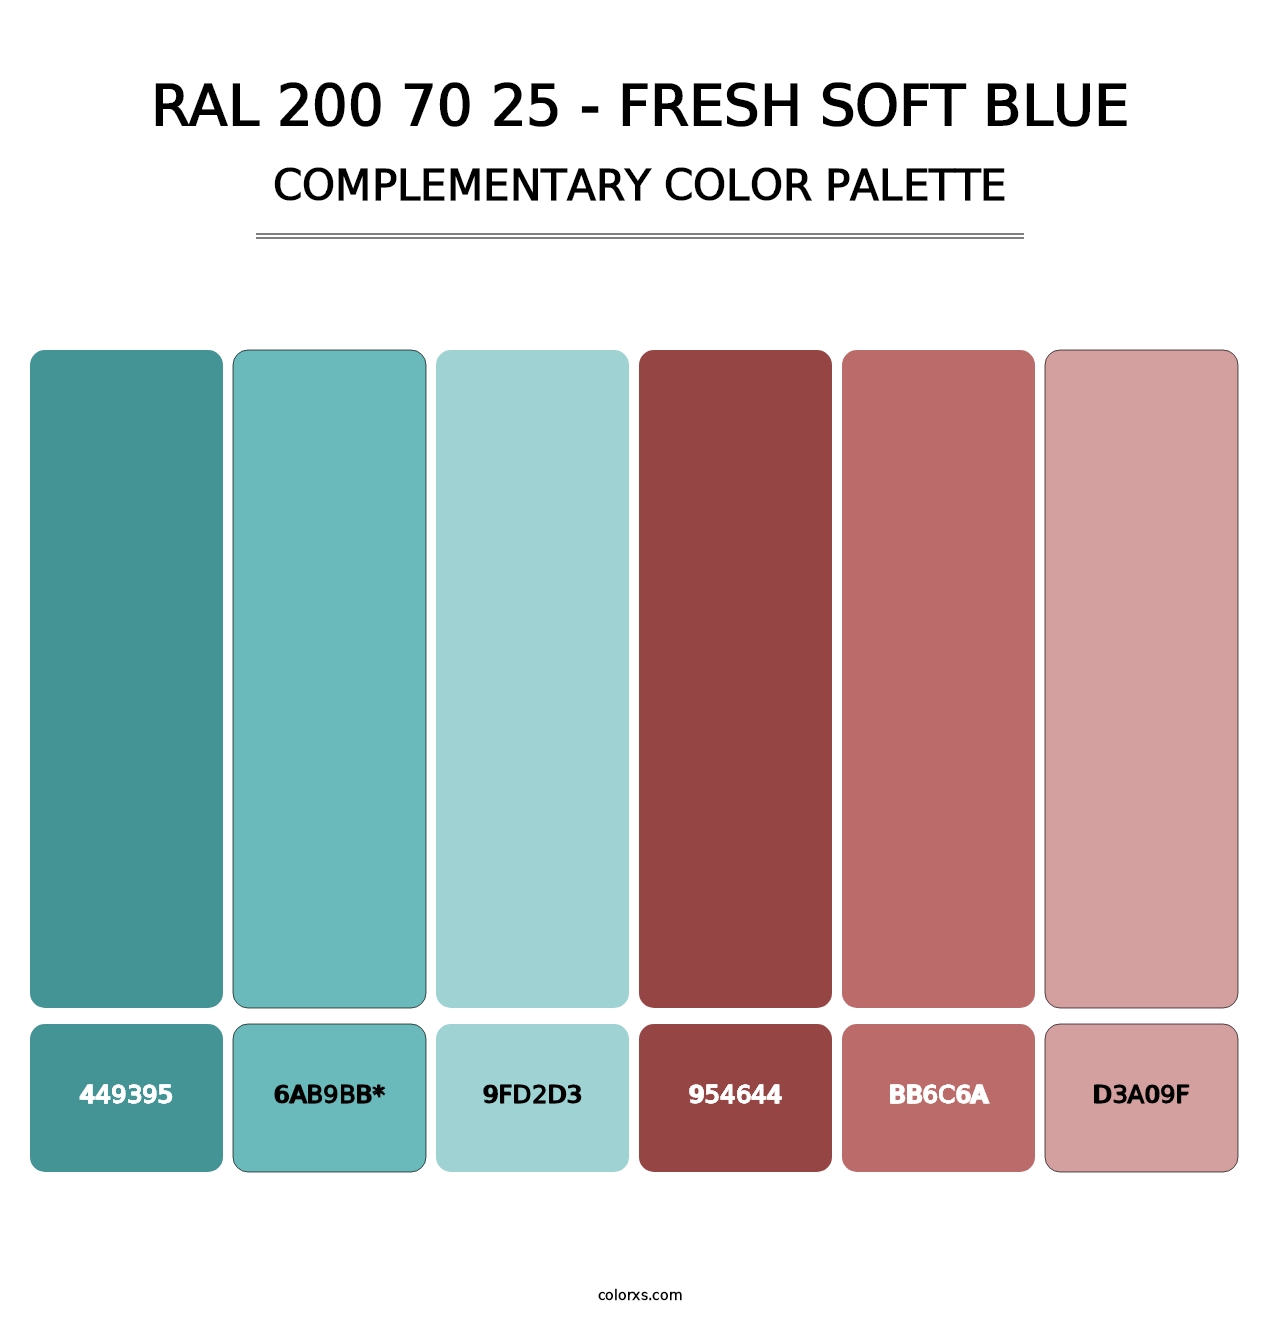 RAL 200 70 25 - Fresh Soft Blue - Complementary Color Palette